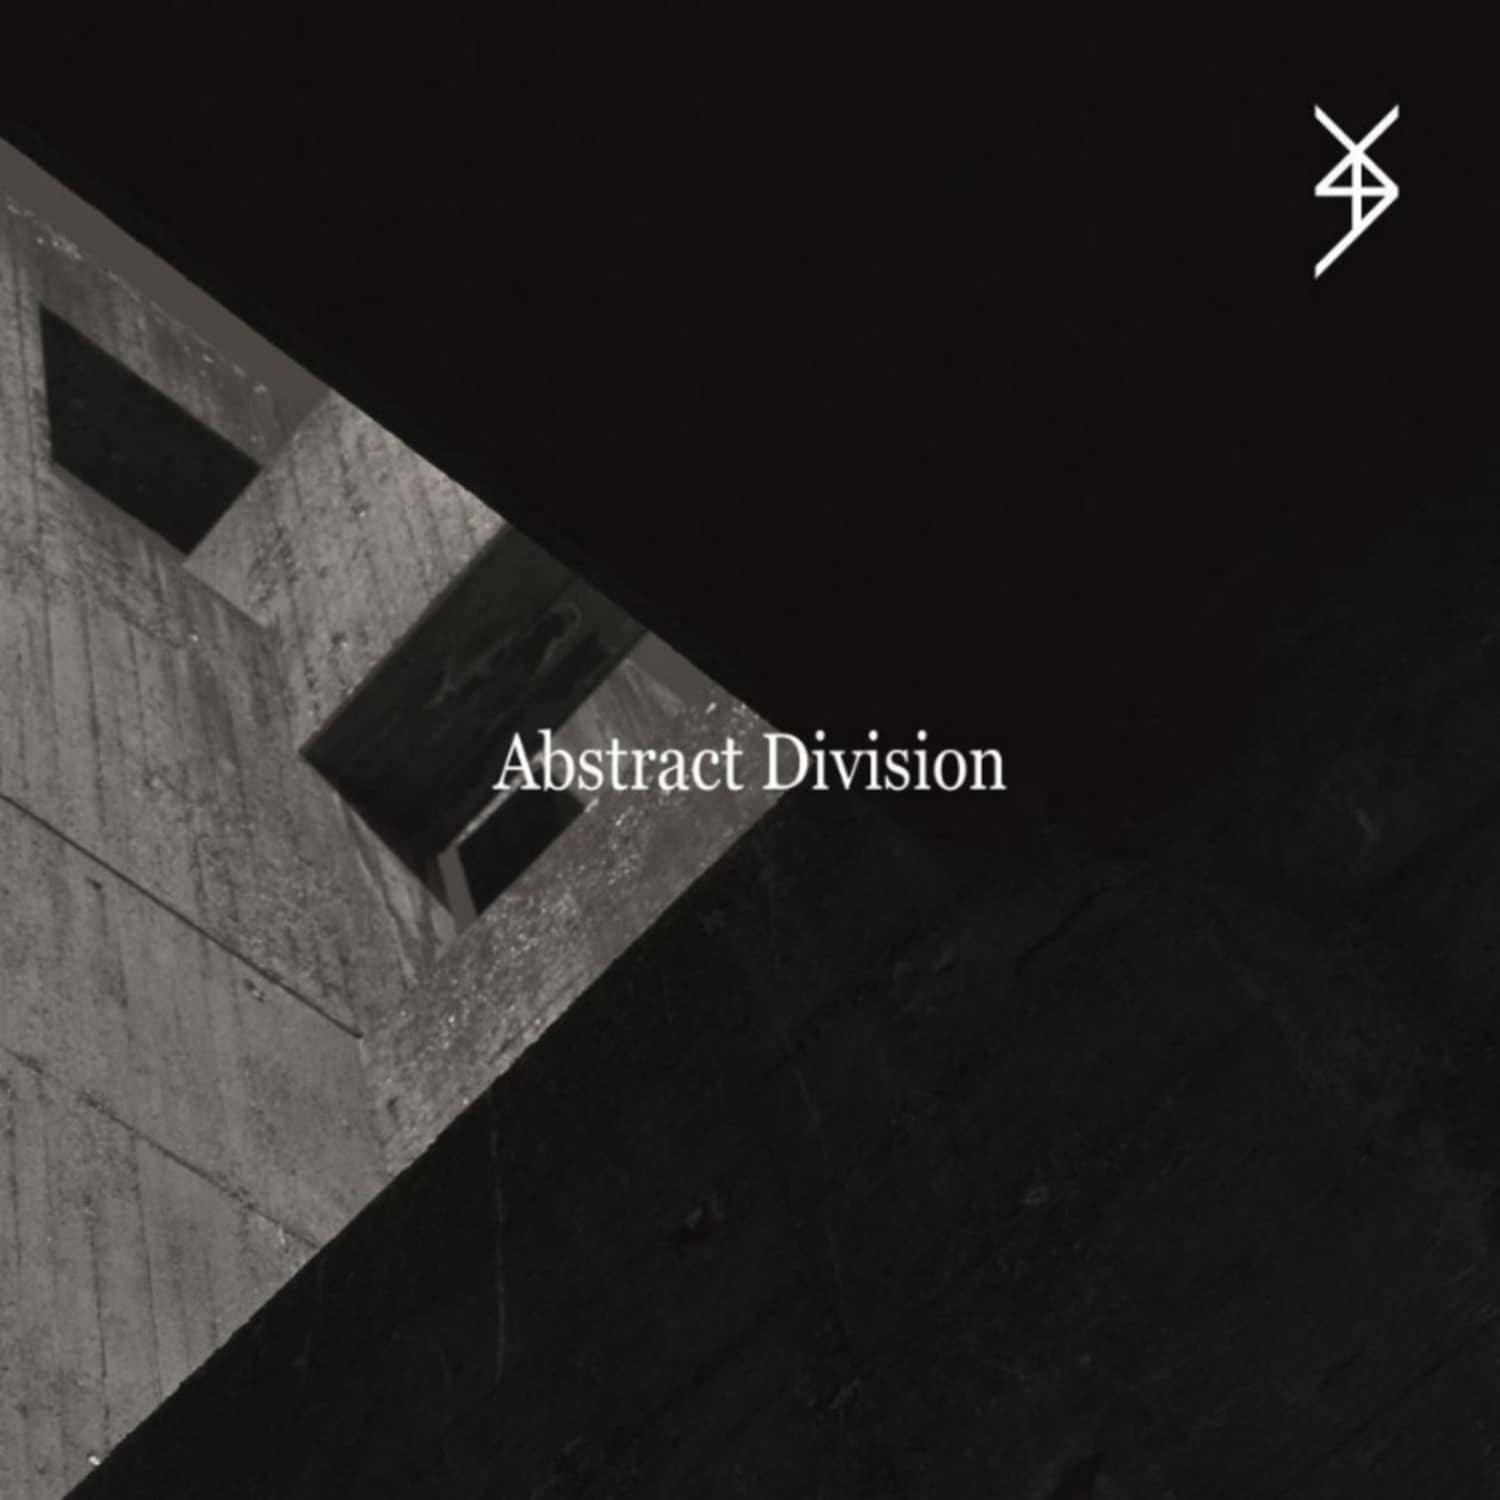 Abstract Division - CORROSIVE MIND